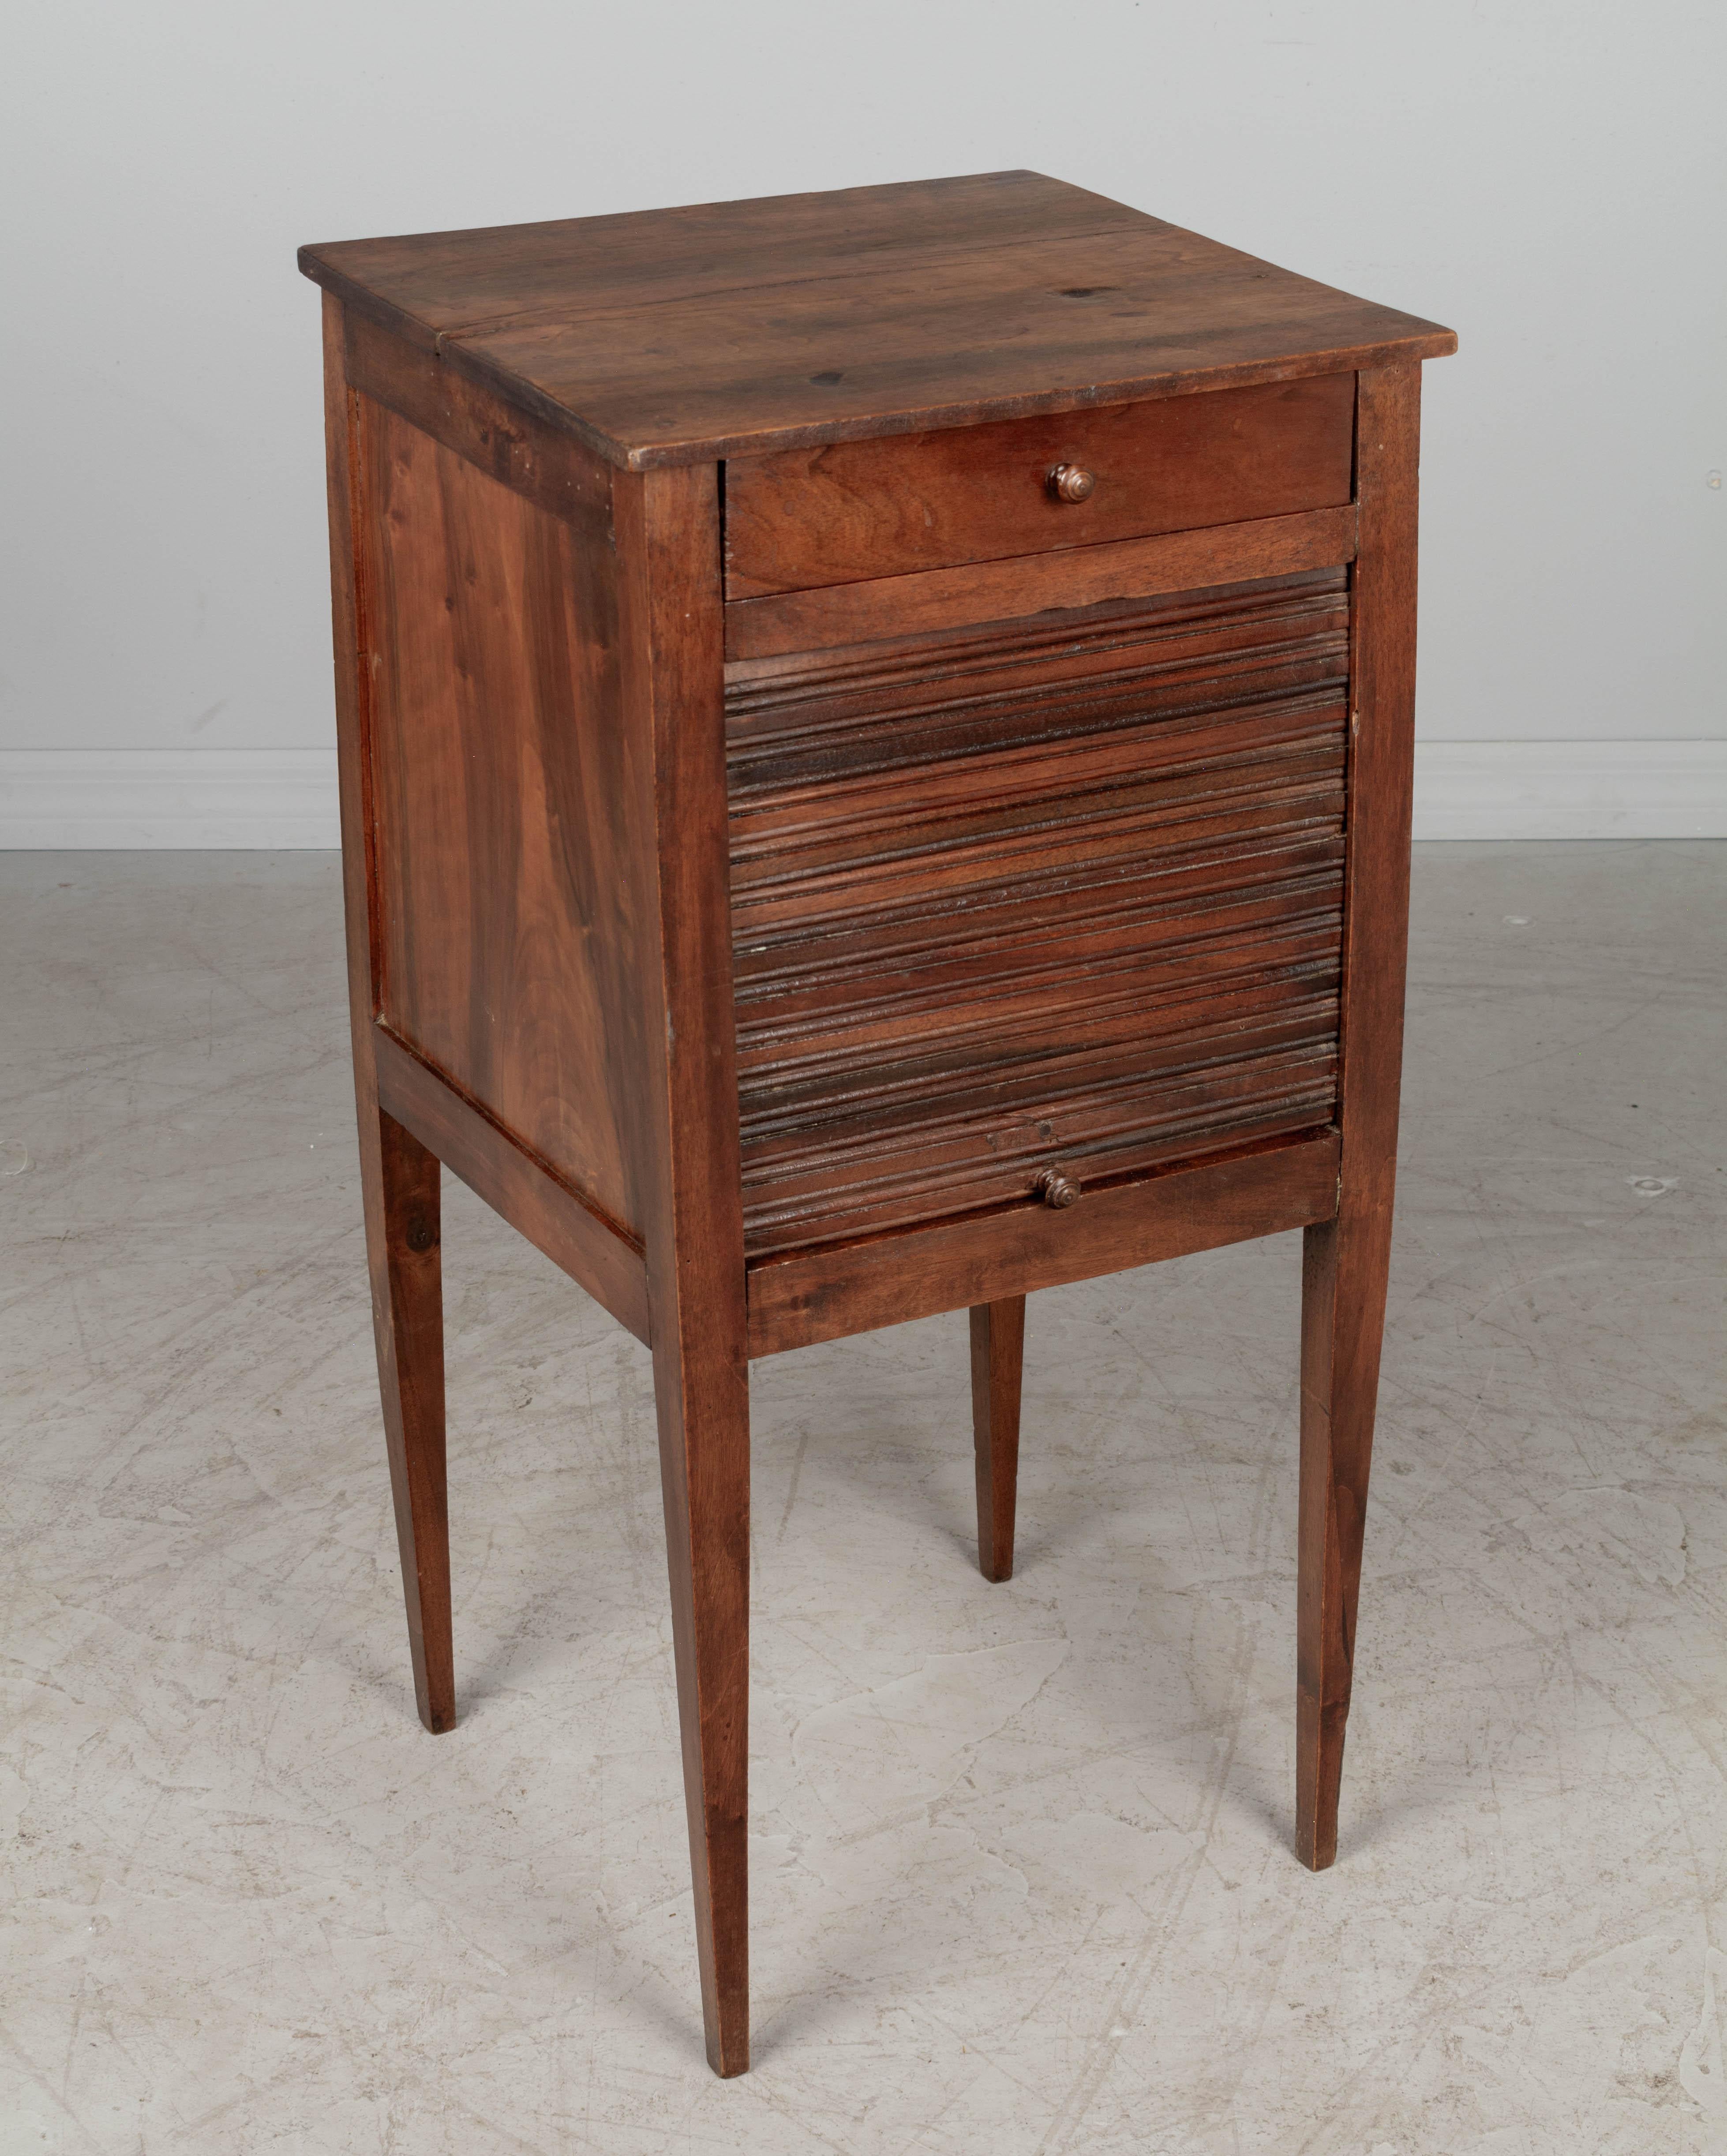 A French Country walnut side table with a vertical tambour door. Finished on all four sides. Slender tapered legs. Waxed patina. All original. May be used as a bedside table. Good overall condition. Circa 1900-1920. 
15.25